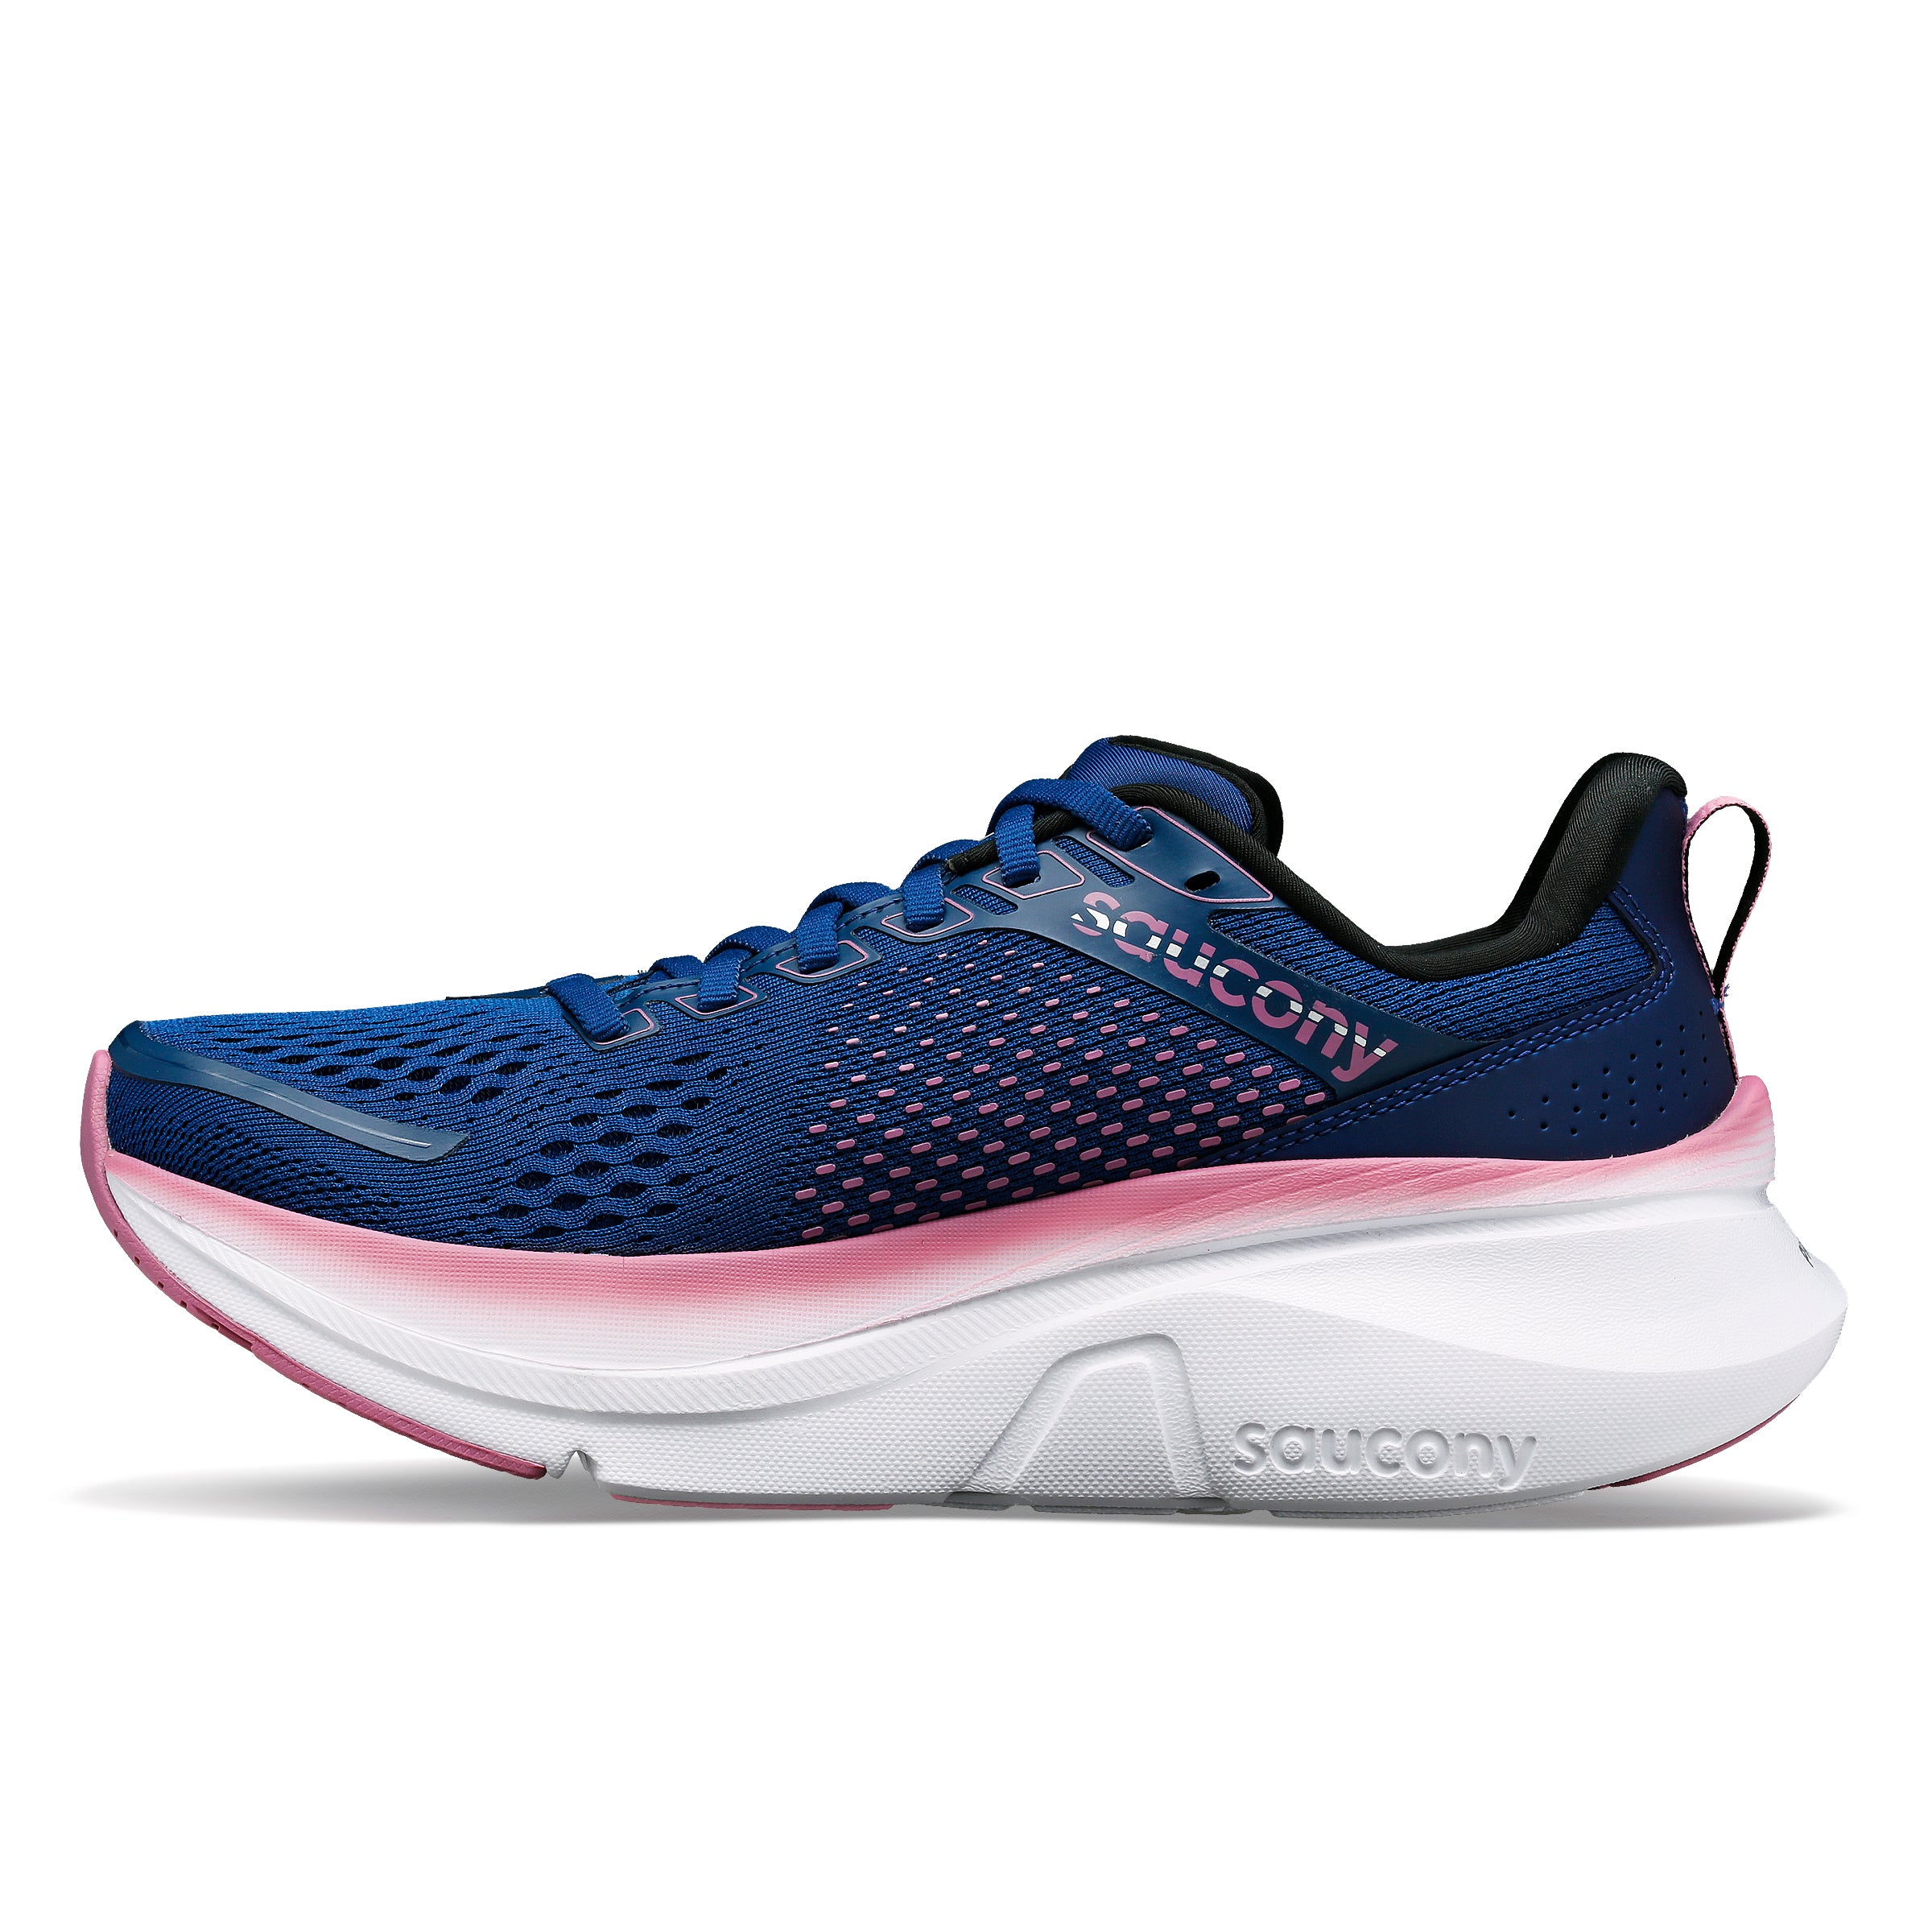 SAUCONY WOMEN'S GUIDE 17 - B - 106 NAVY/ORCHID 